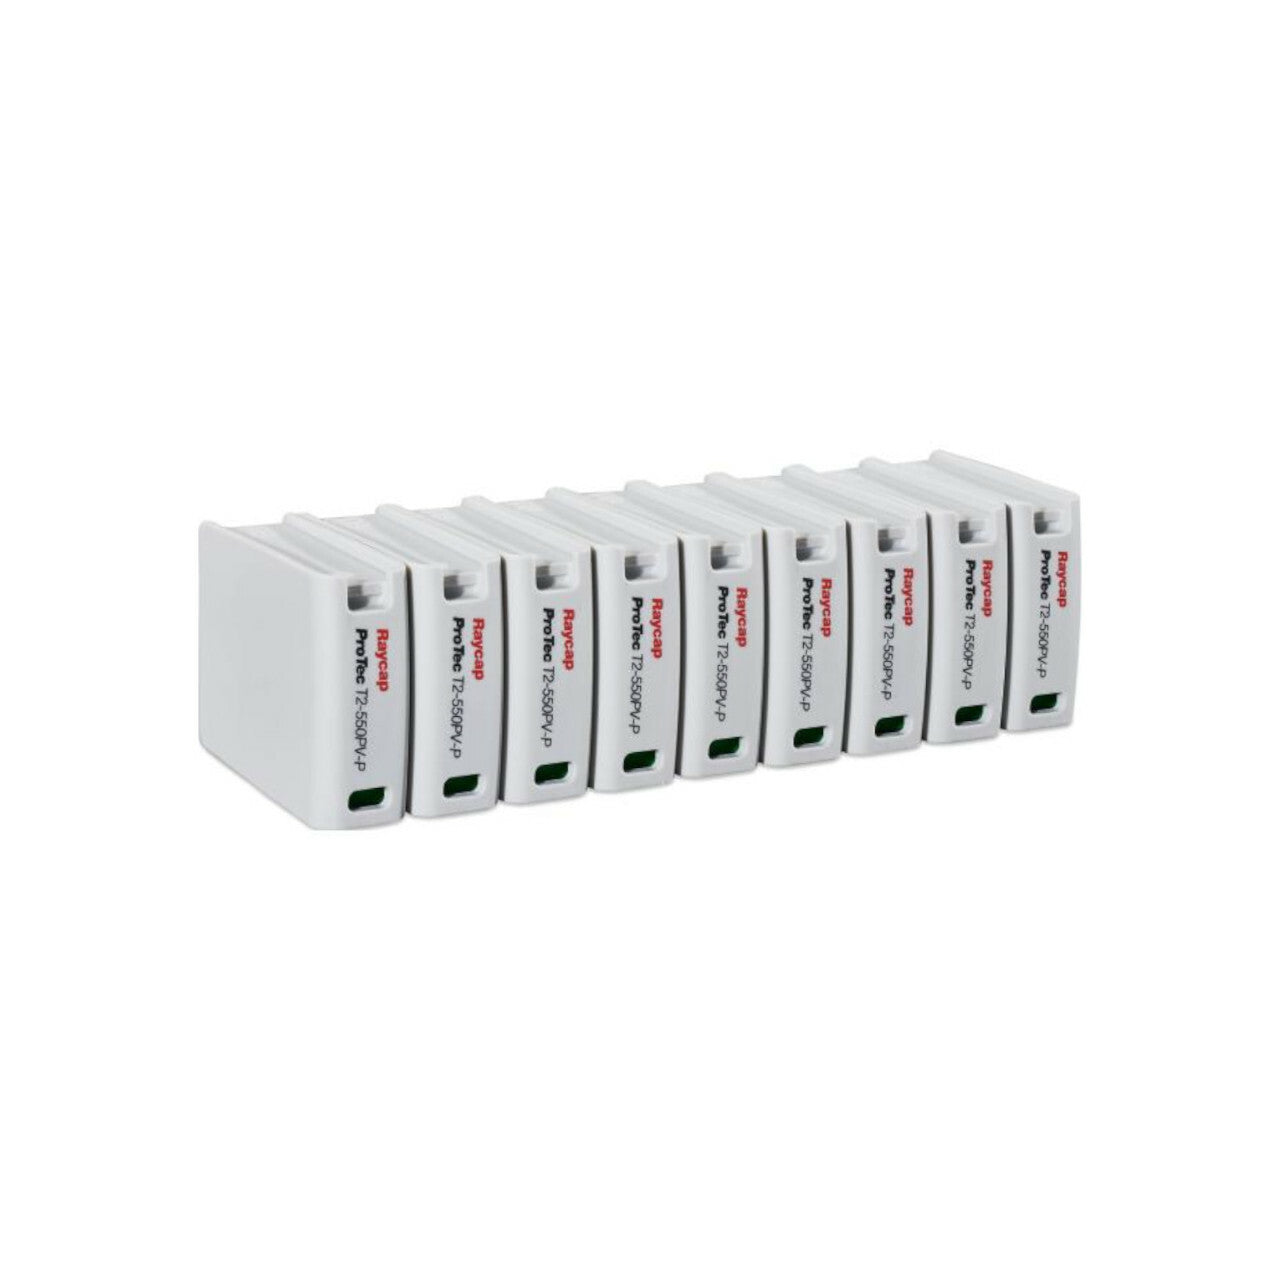 SMA - Core1 DC surge protection kit (Type2 OVP)｜2-4 Weeks Ship Time